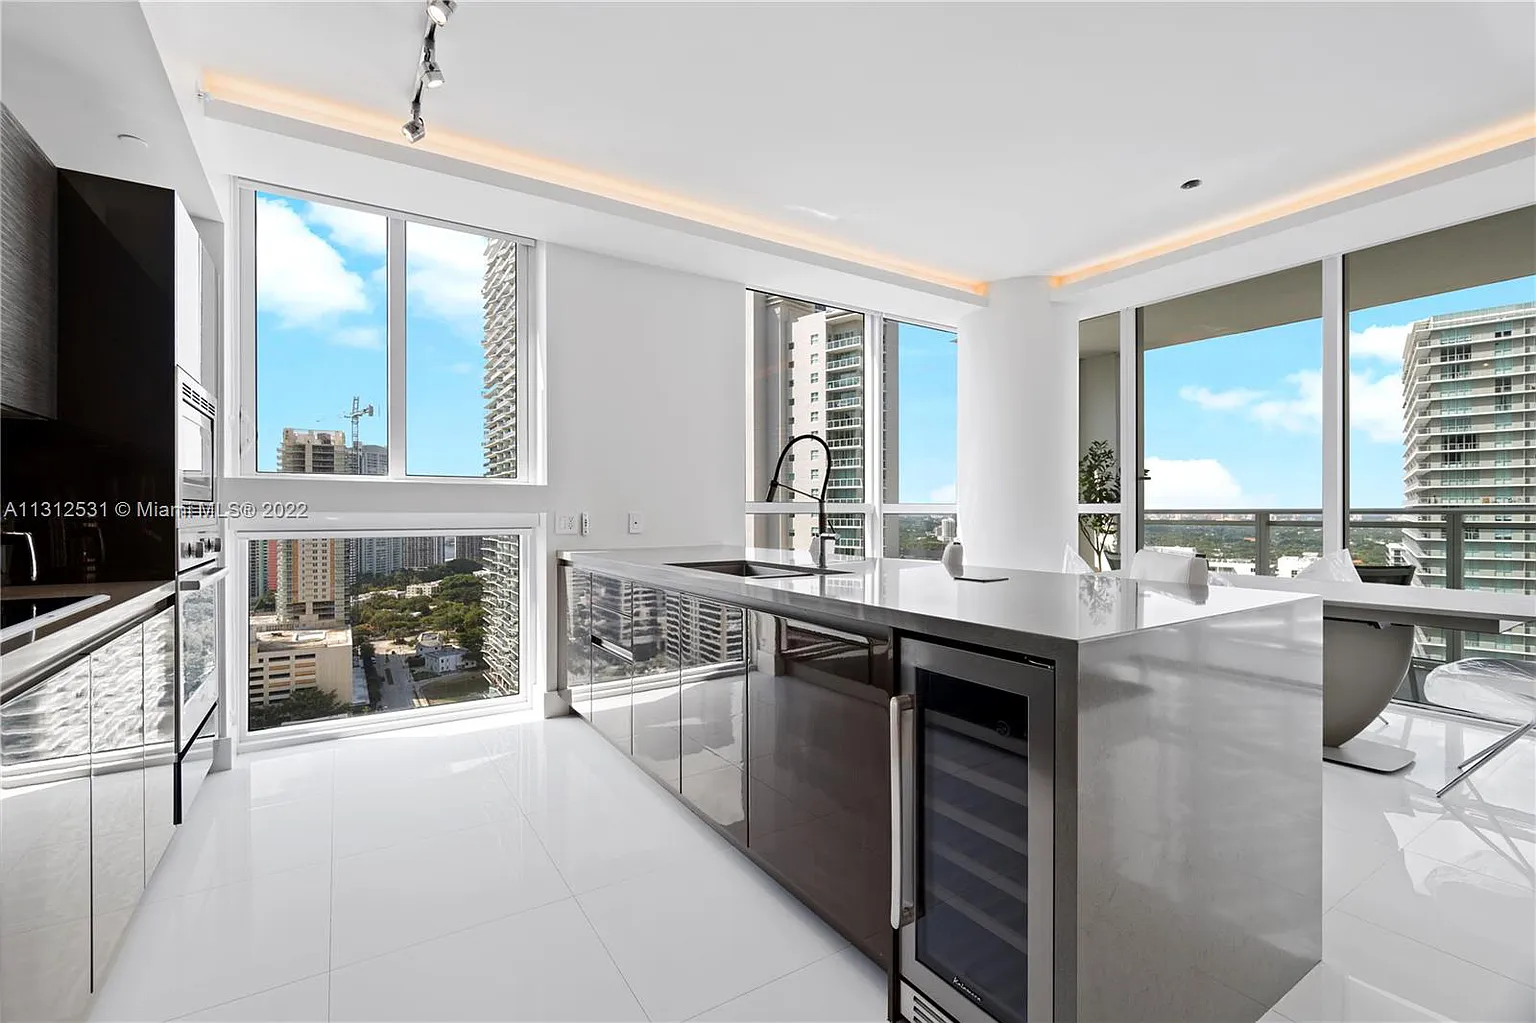 The Lifestyle-Design Kitchens in The Bond on Brickell